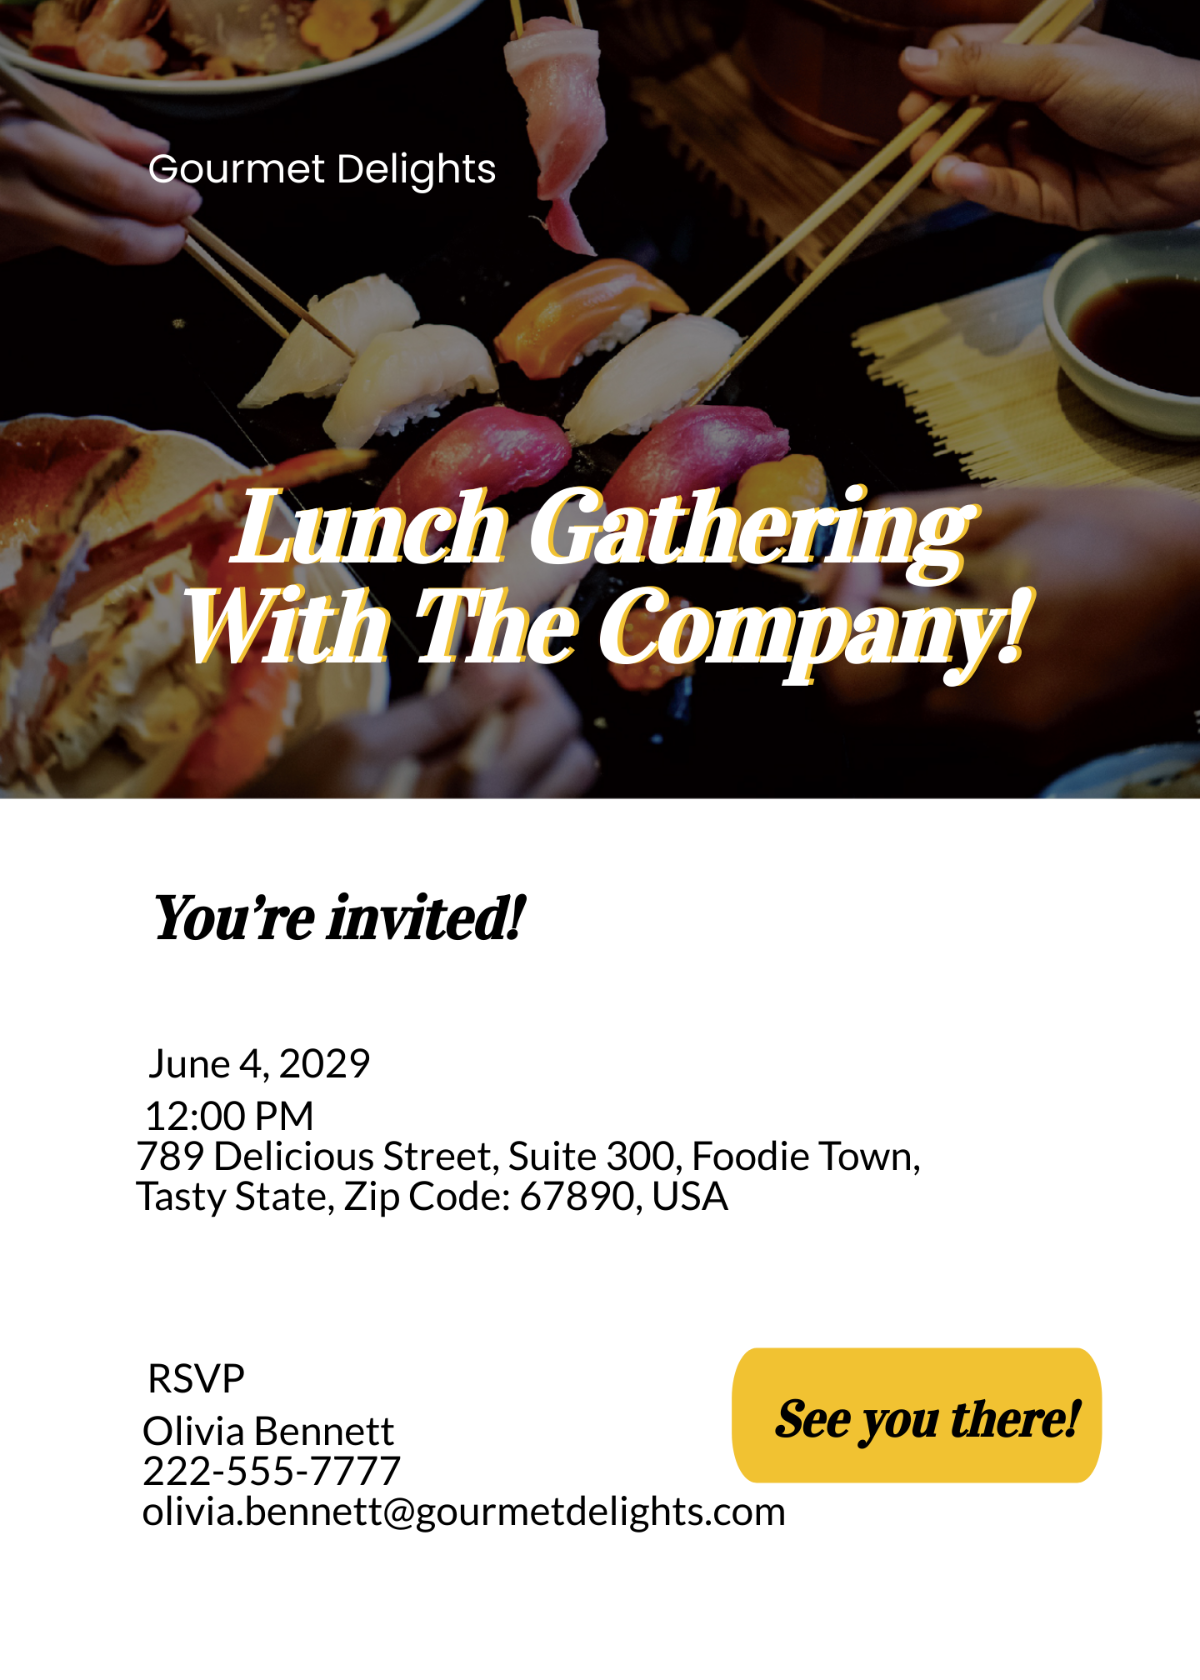 Email Lunch Invitation